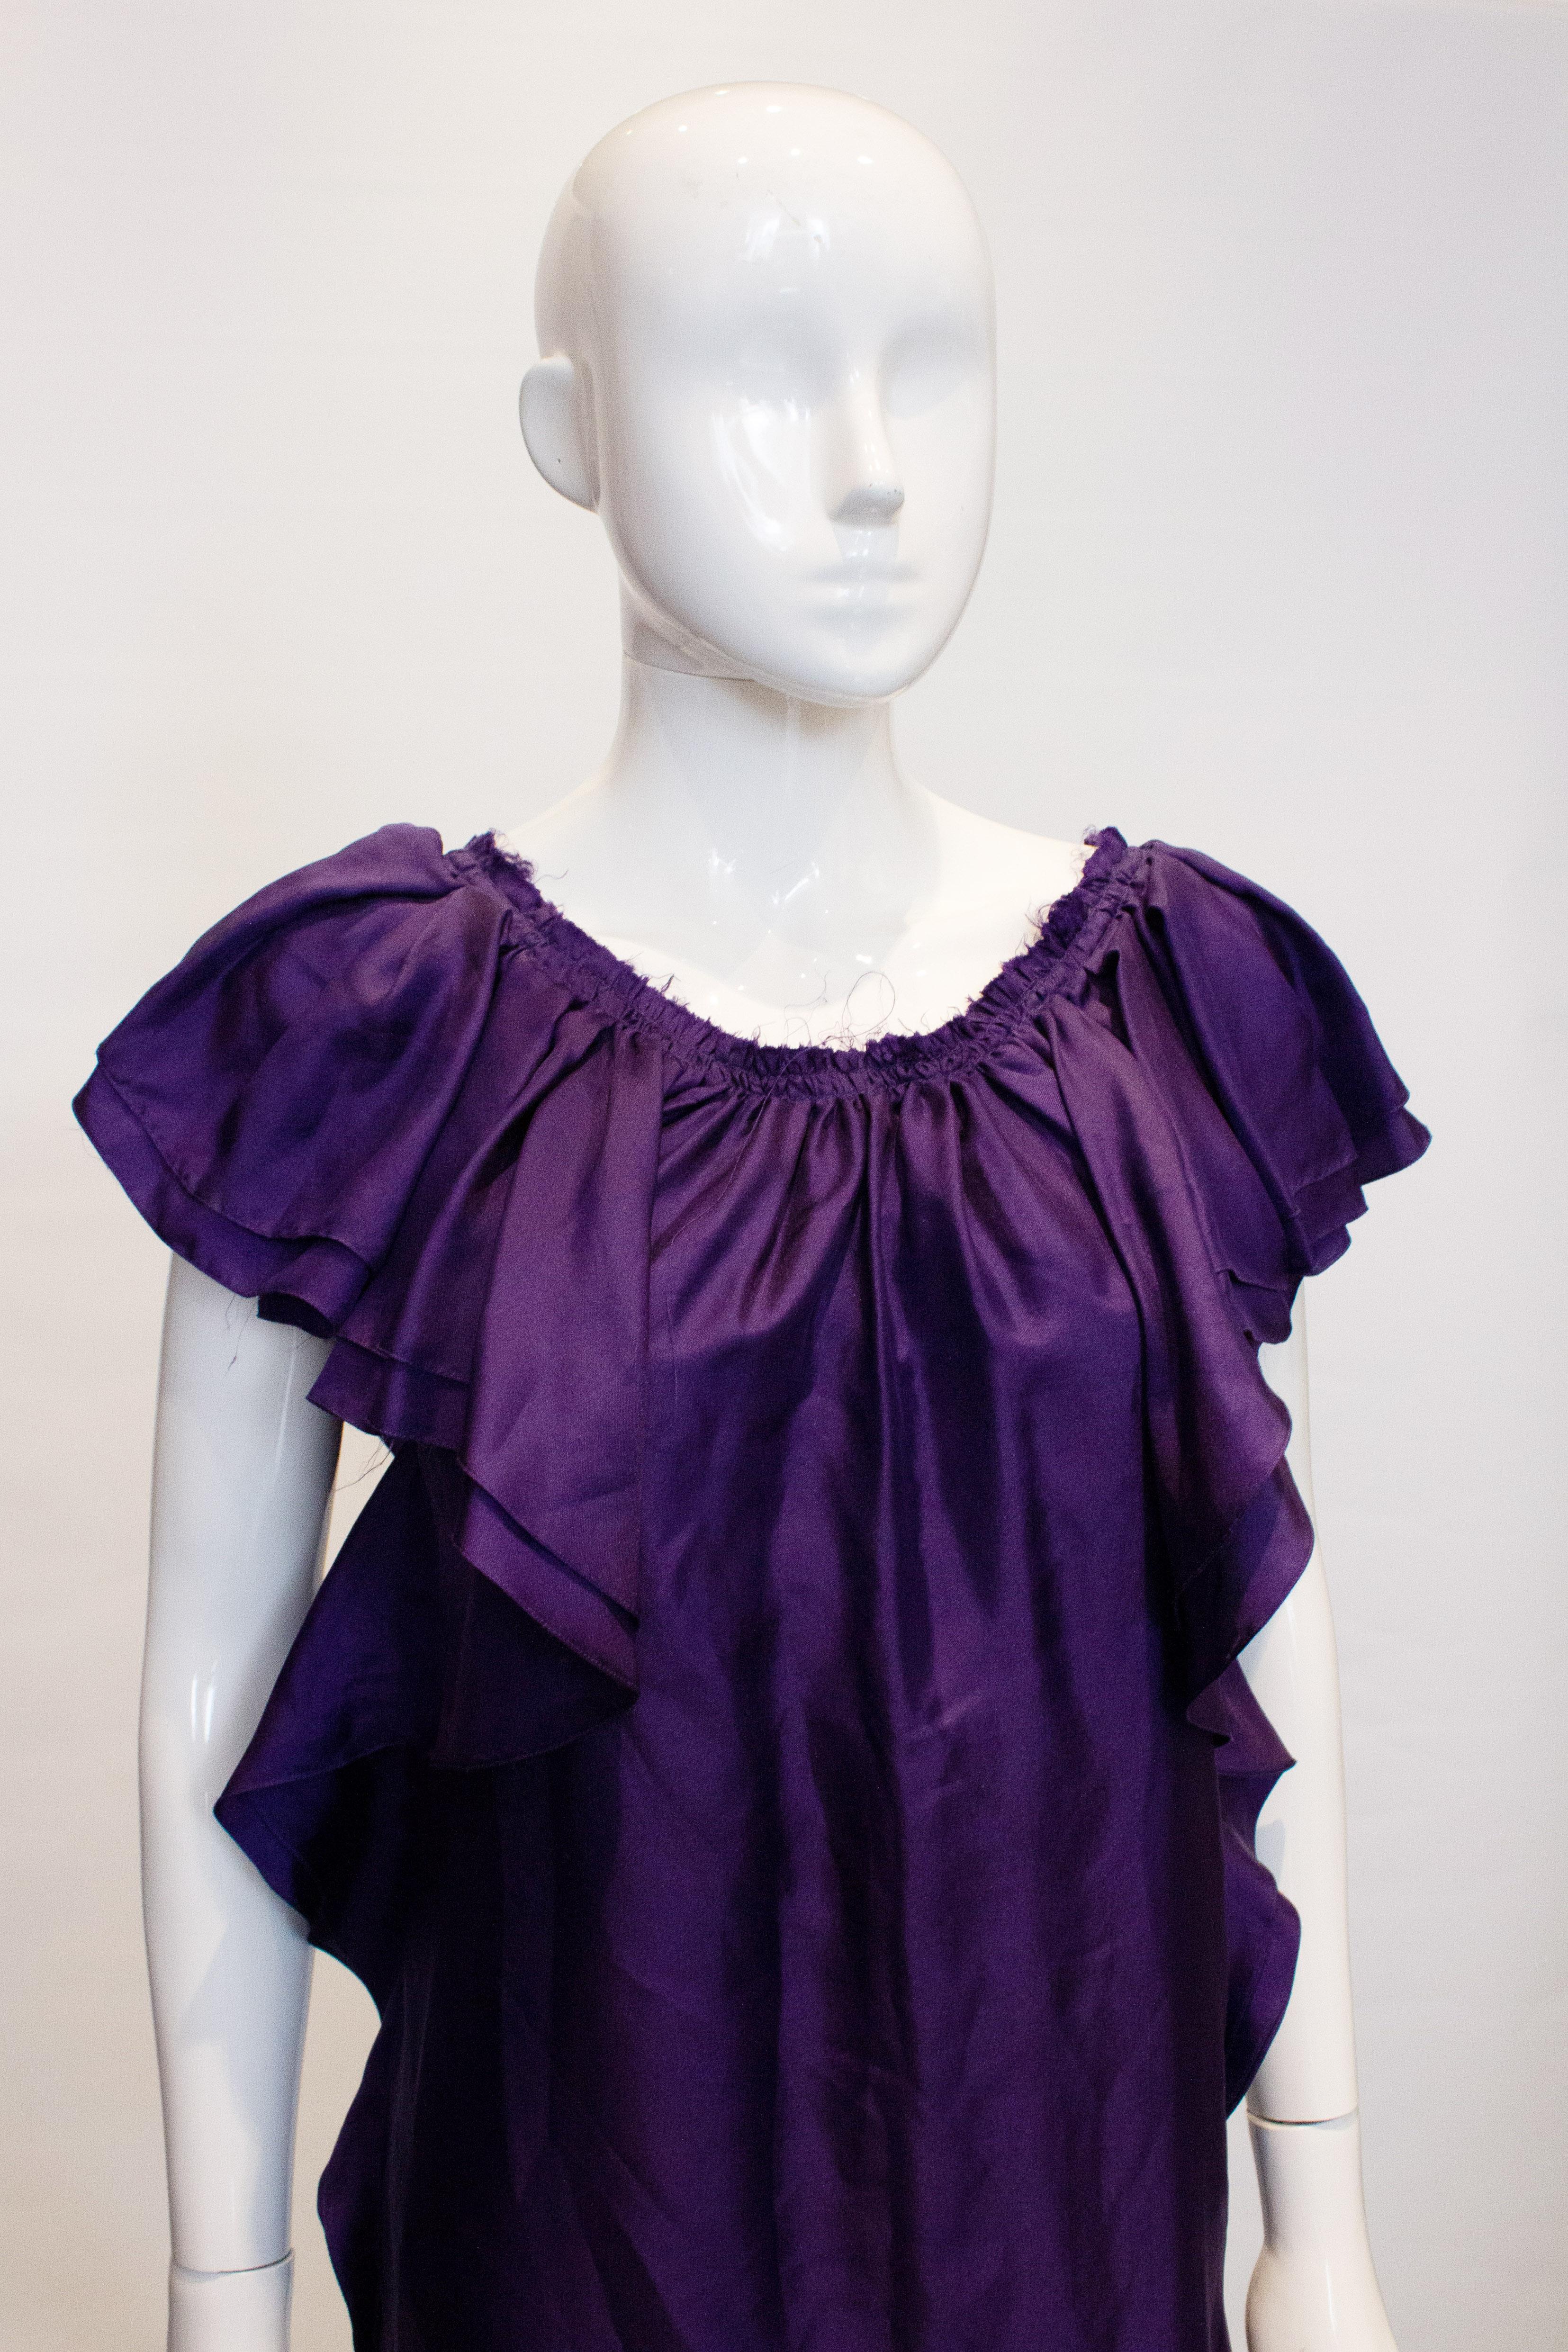 A pretty purple silk dress by Lanvin, Summer 2008. The dress is unworn with clothing tags intact.  It has gathering at the neck and frills around the armholes and along the side. There is a 3''border at the hem, and it is marked size 38.